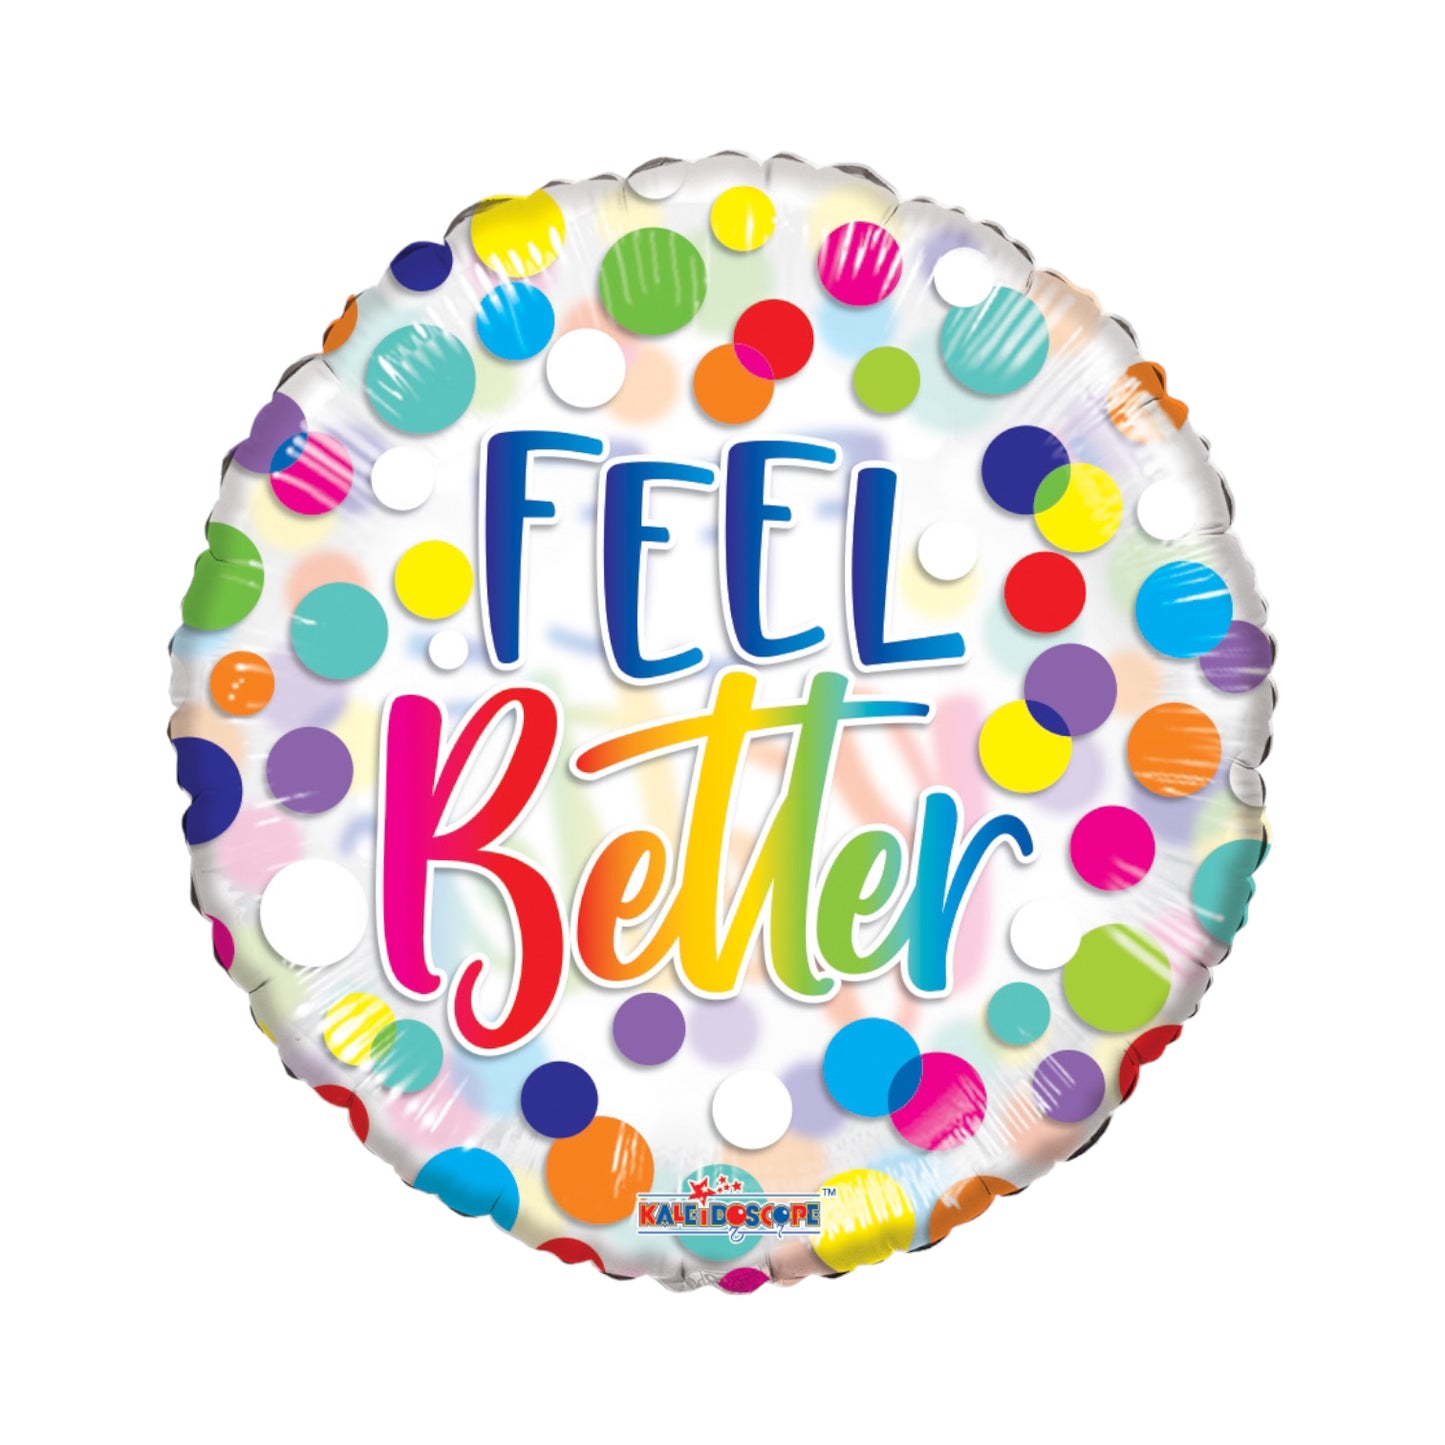 Feel Better Balloon - Clear-view with Colour Dots.